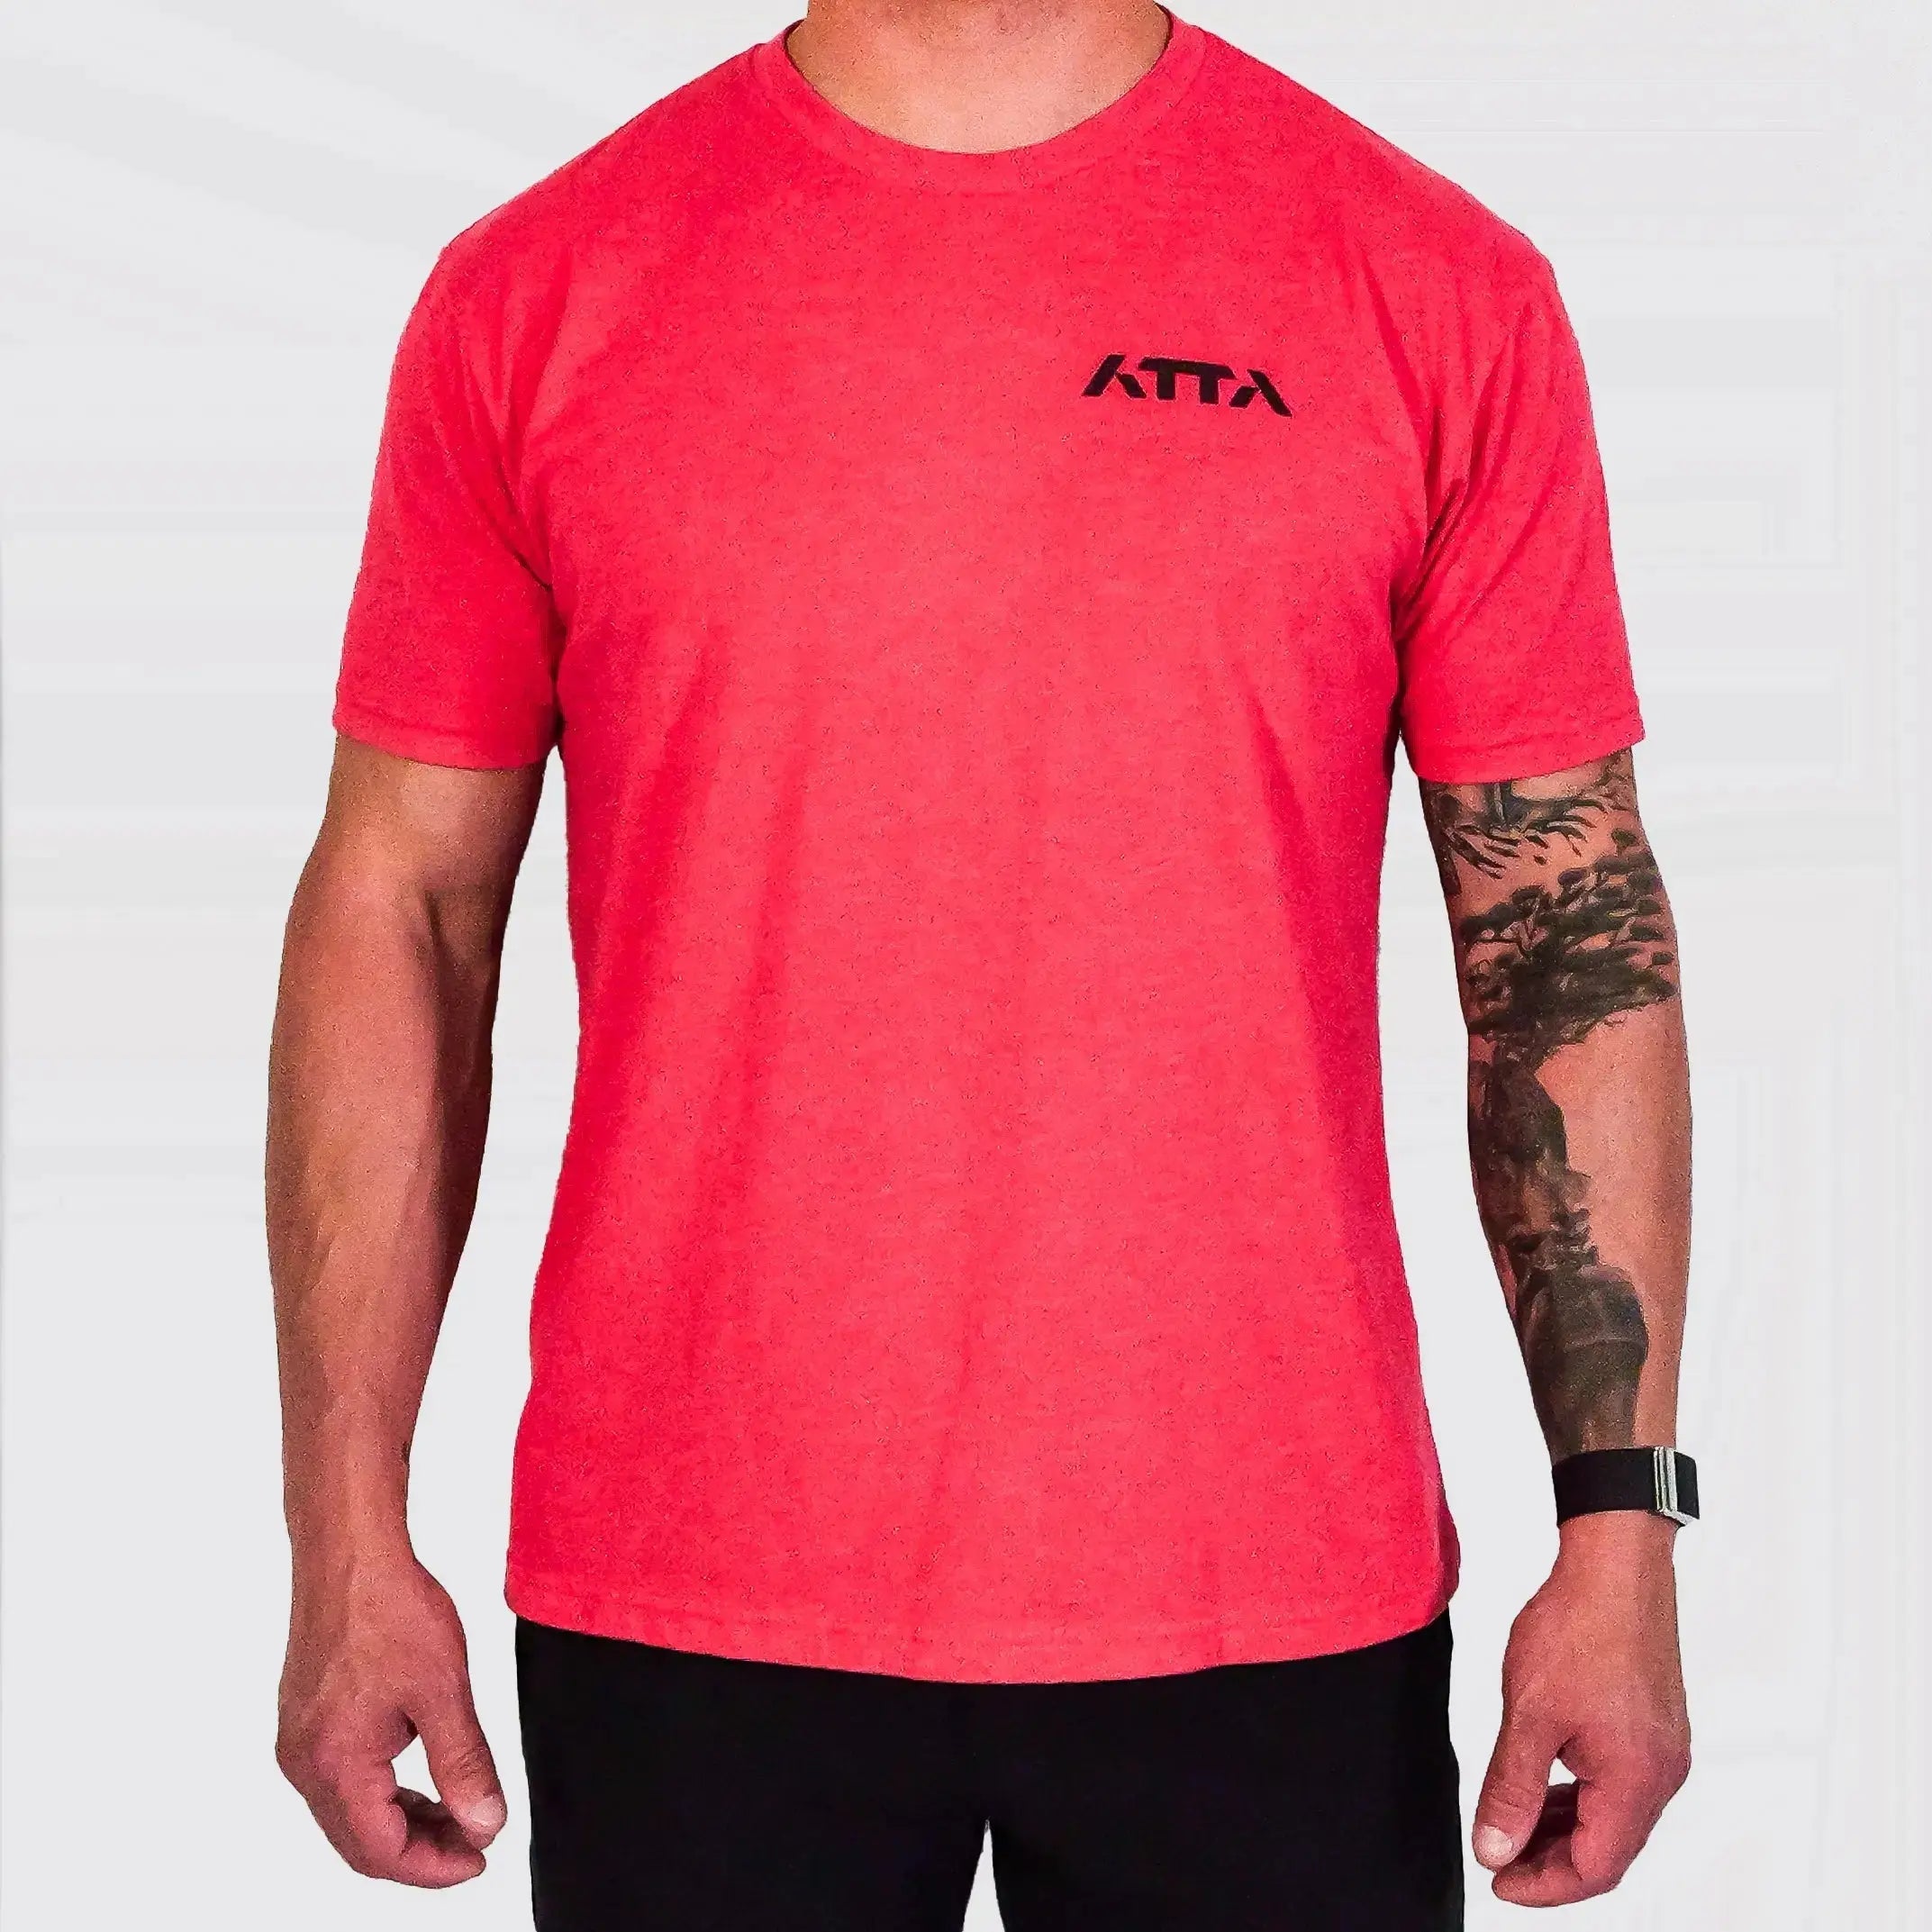 Copy of Limited Run: Do Hard Things Tri-Blend Shirt - Vintage Black & Red LiveATTA